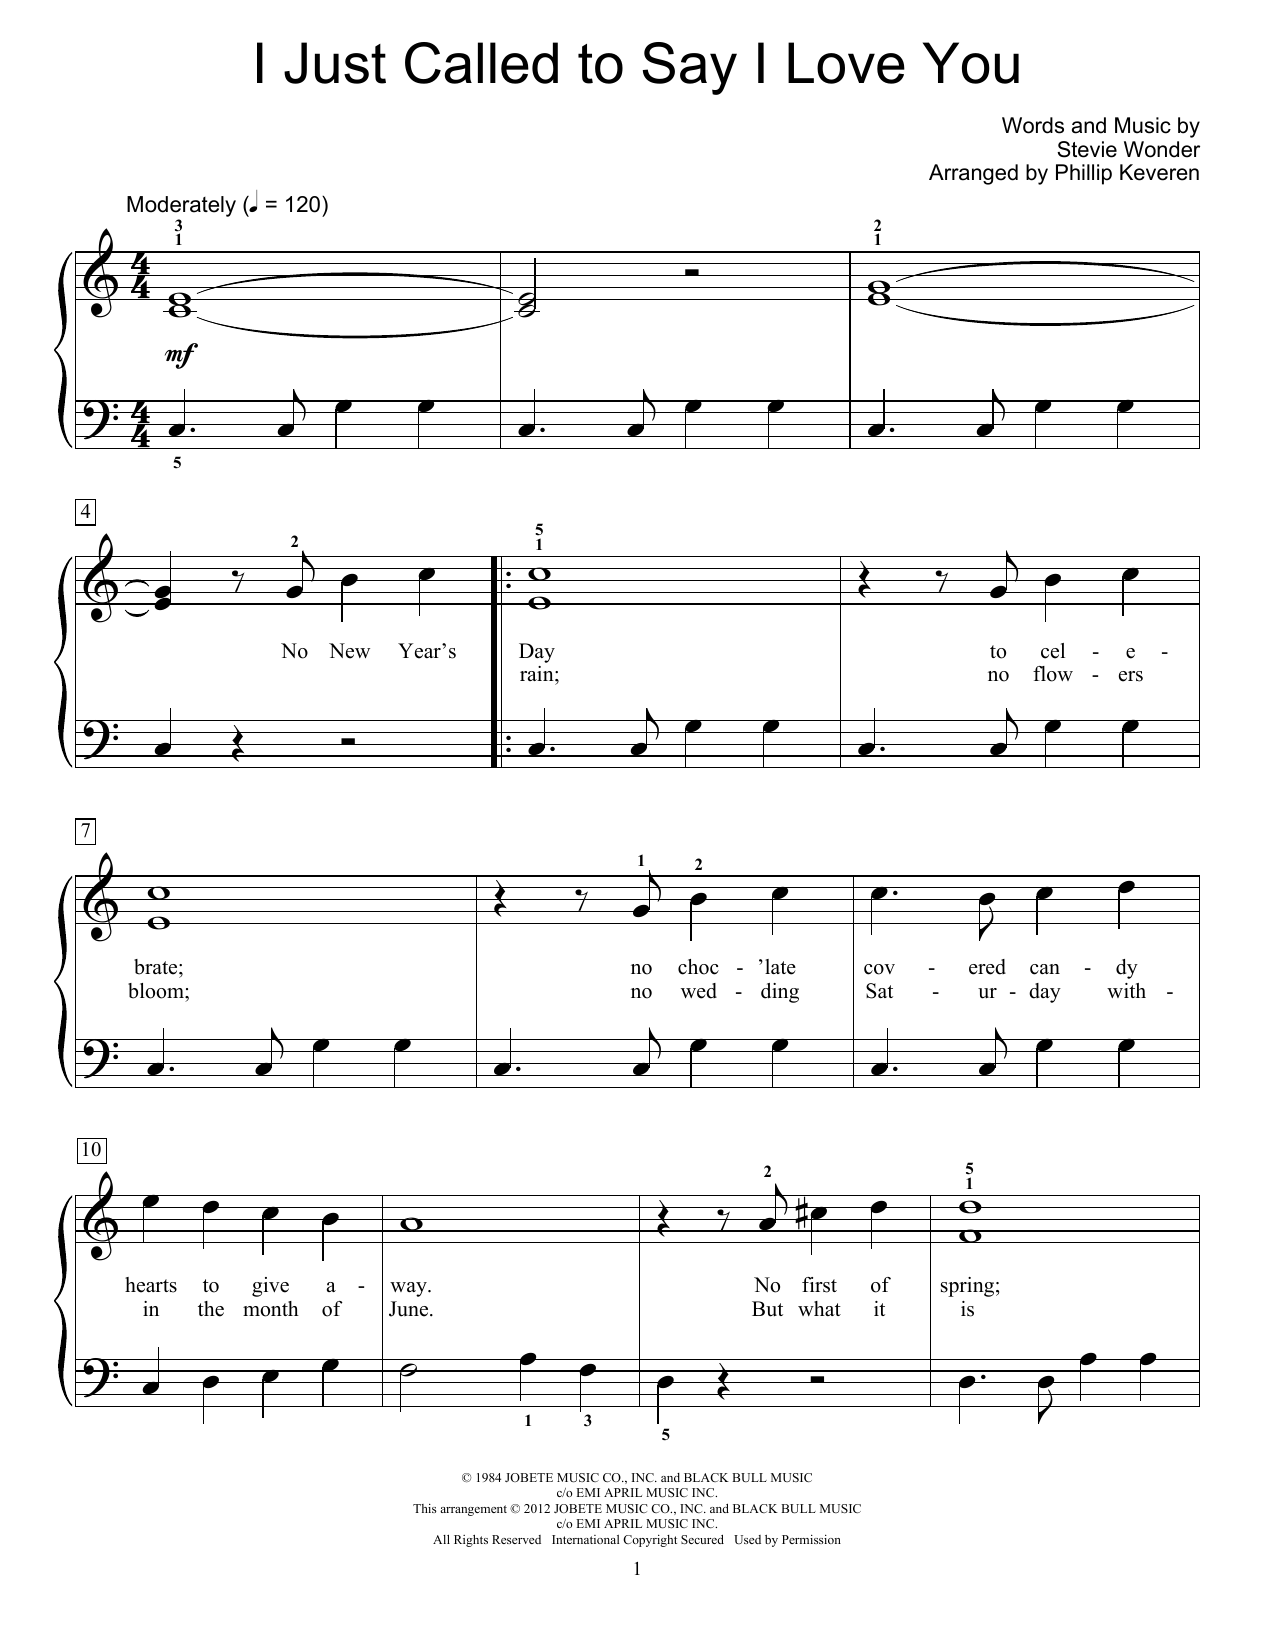 Download Stevie Wonder I Just Called To Say I Love You Sheet Music